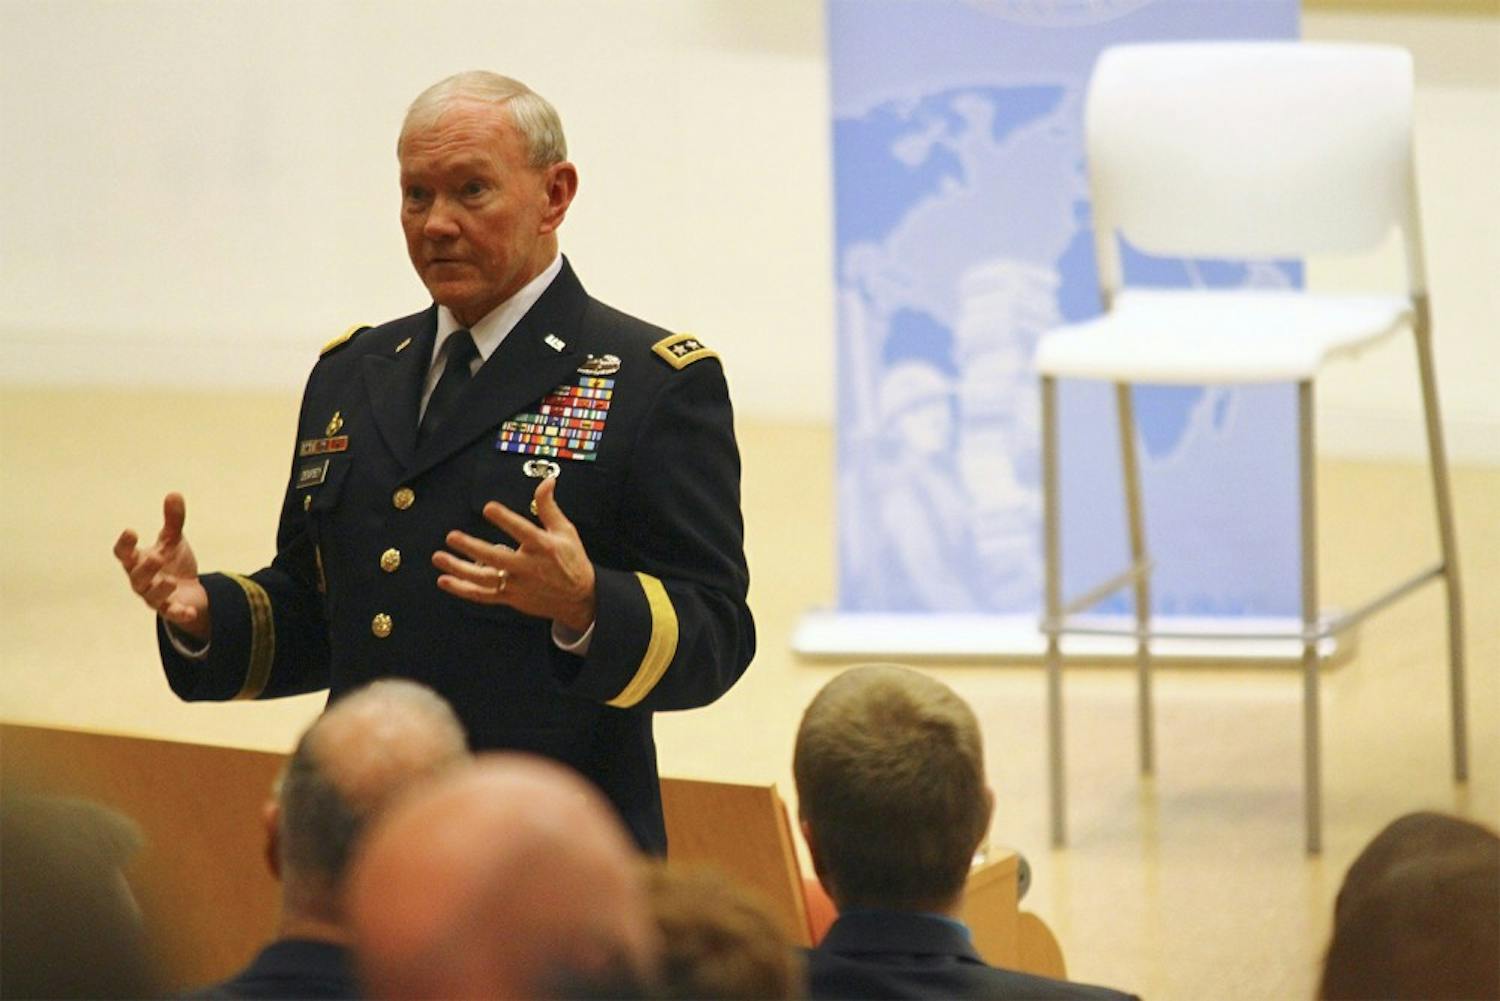 General Martin E. Depsey, the chairman of the U.S. Joint Chiefs of Staff, spoke in the Genome Sciences Building on Feb. 6 at 5:30pm.